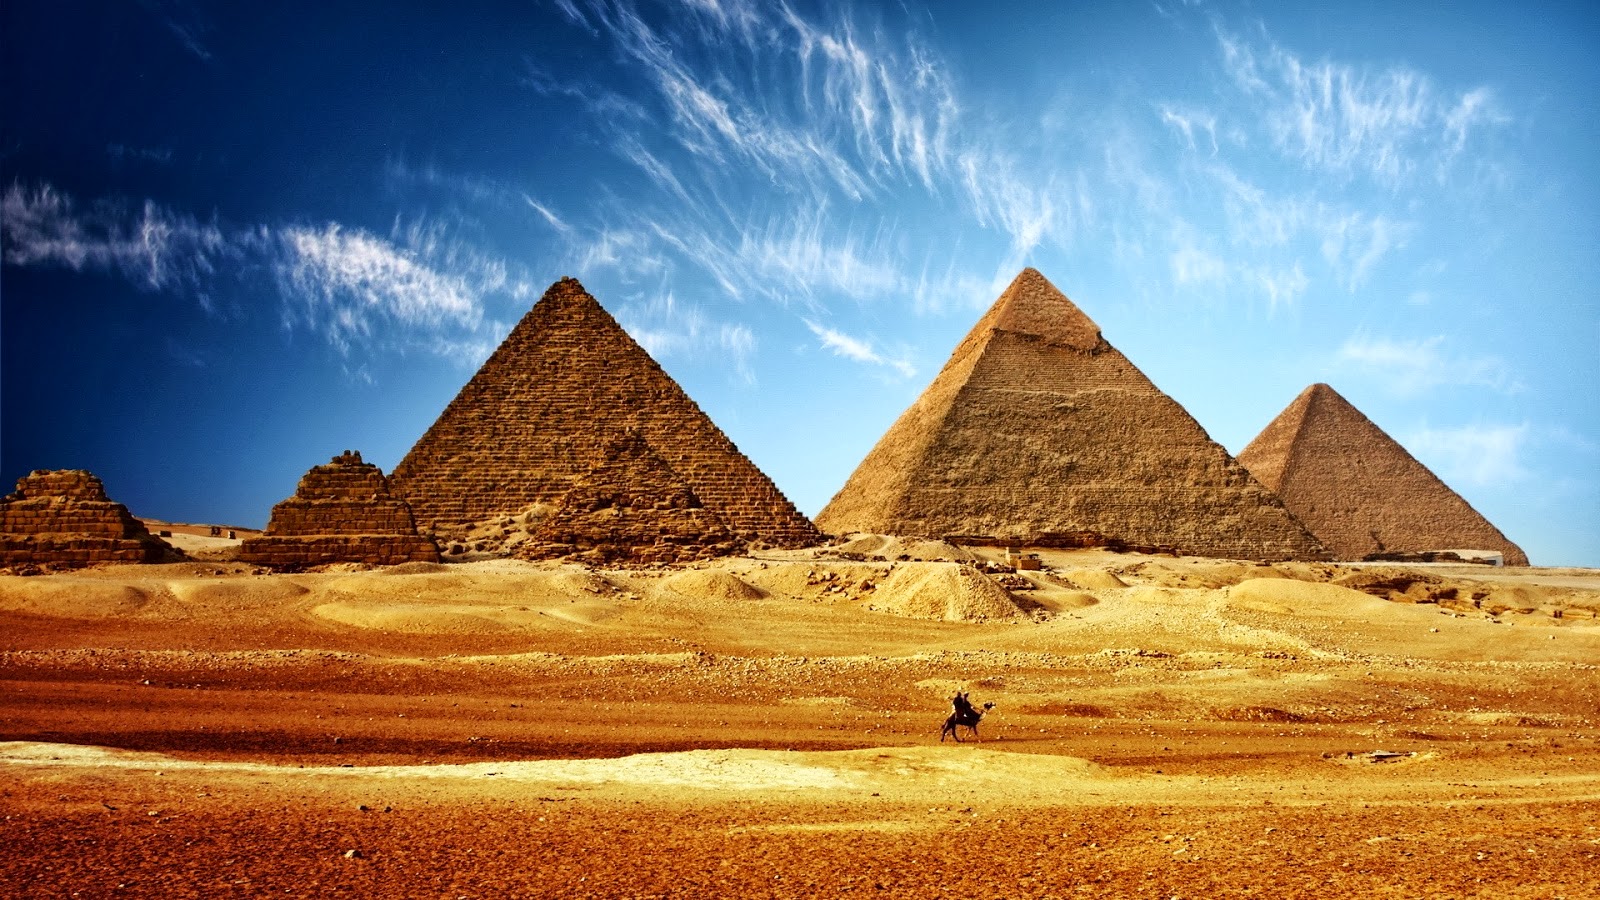 The Pyramid complex at Giza, one of the world's famous places